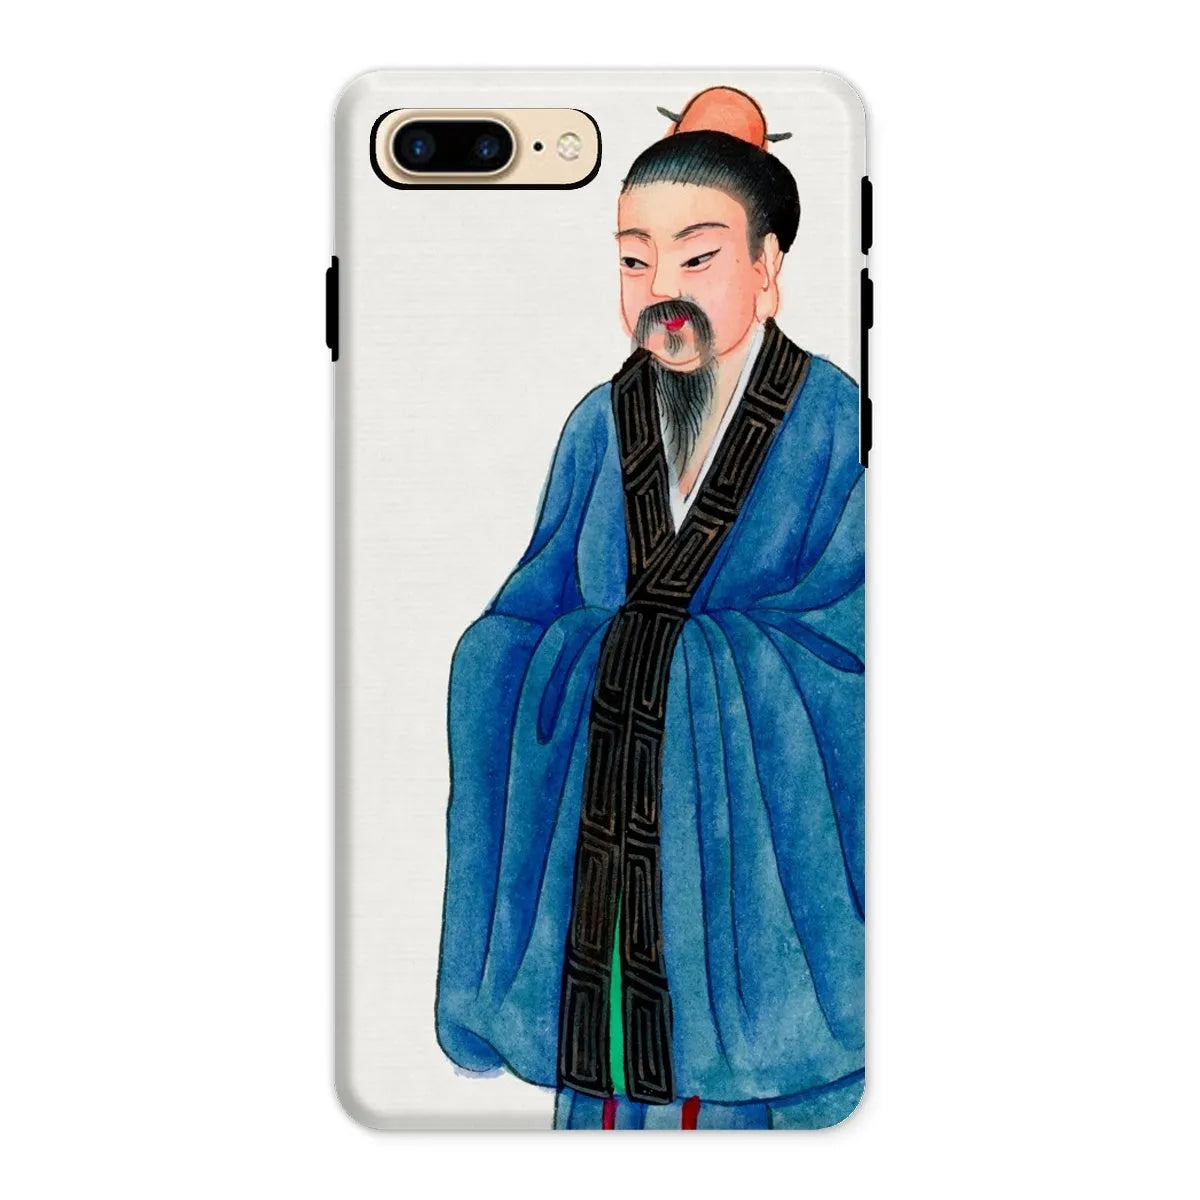 Grand Master - Chinese Buddhist Aesthetic Art Phone Case - Iphone 8 Plus / Matte - Mobile Phone Cases - Aesthetic Art